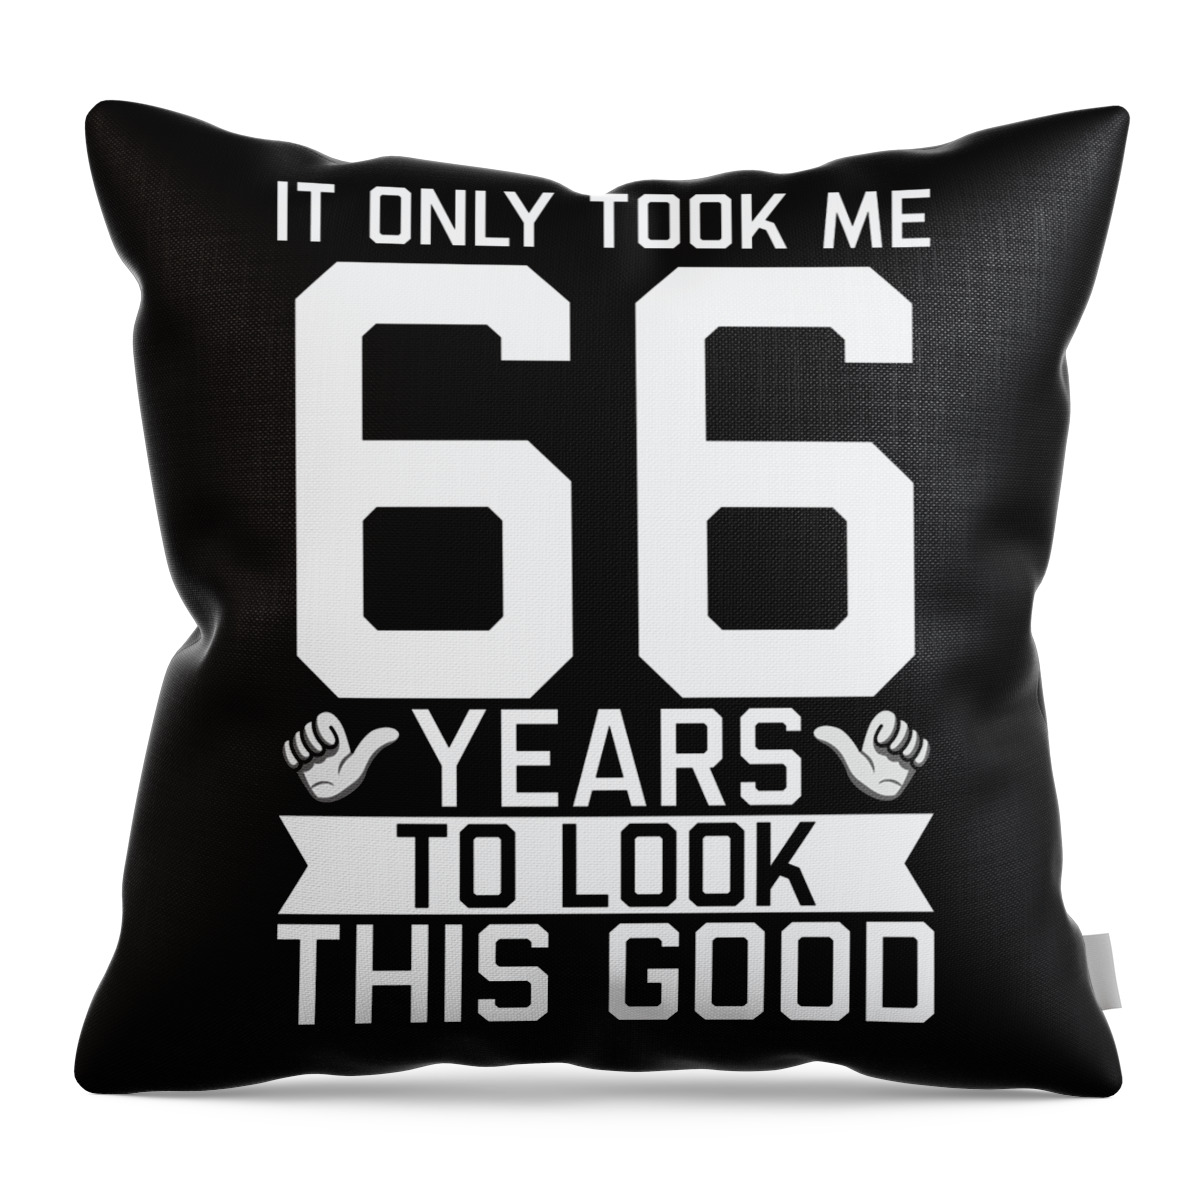 66th Birthday Throw Pillow featuring the digital art It Only Took Me 66 Years To Look This Good 66th Birthday #2 by Toms Tee Store